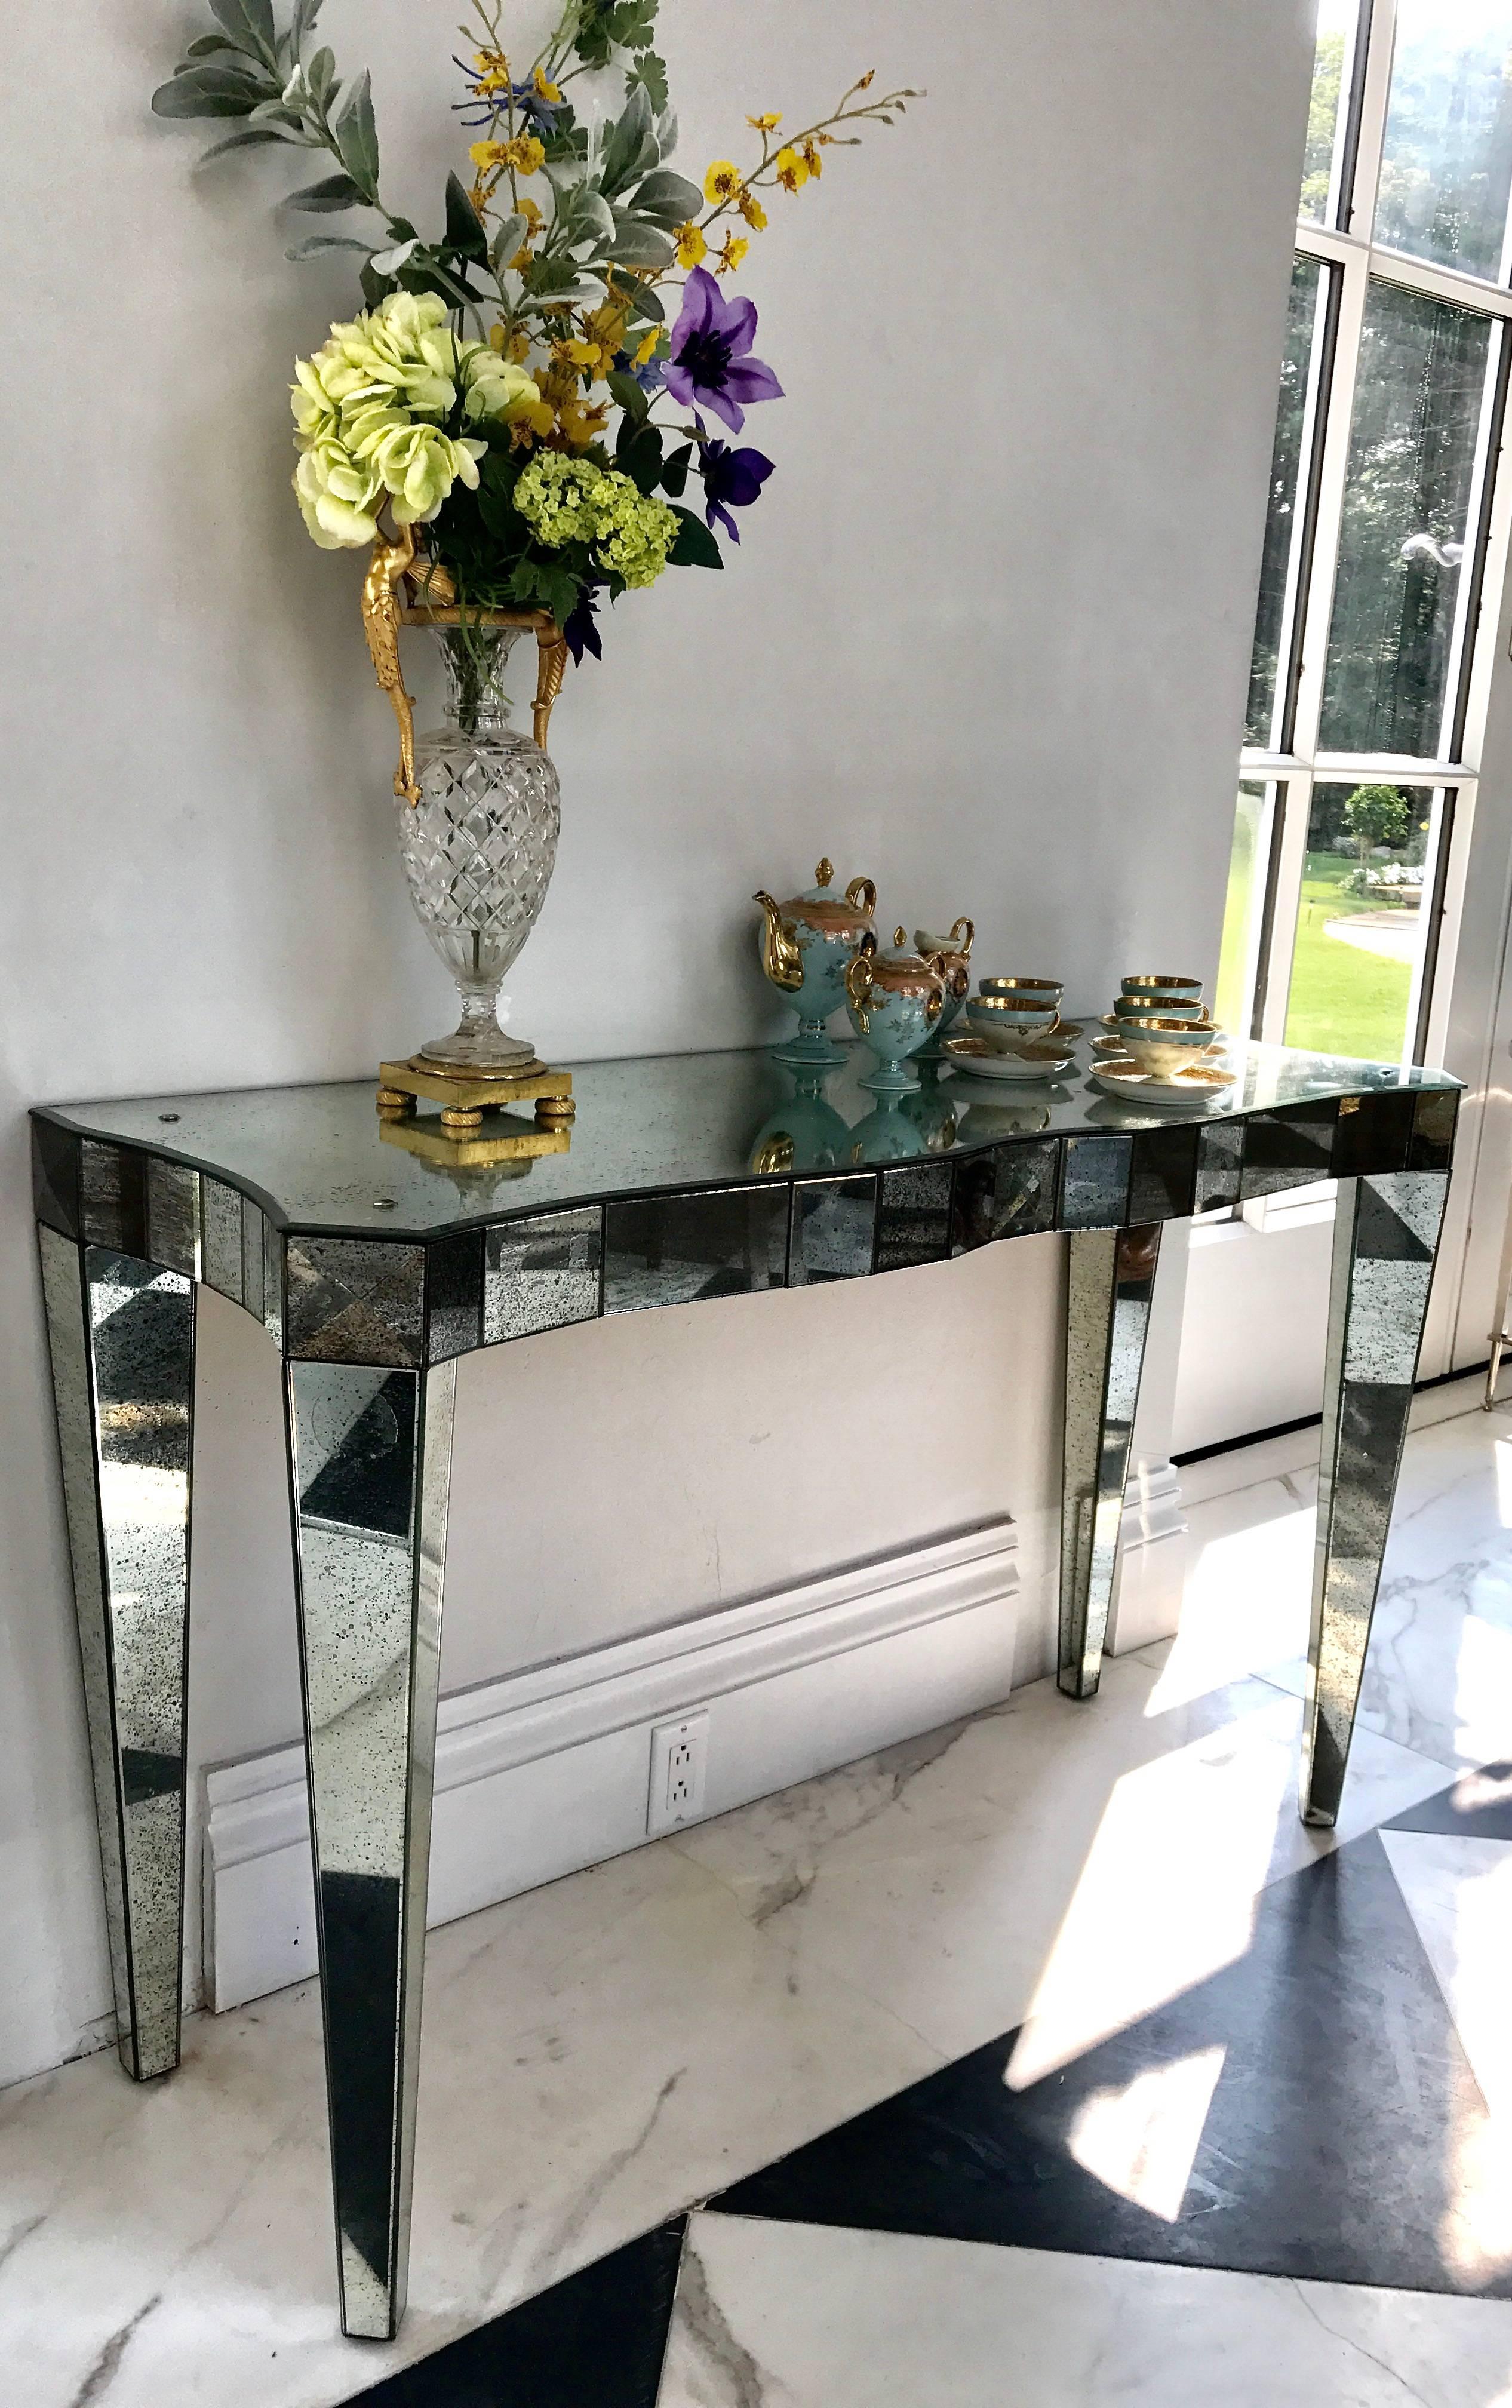 This elegant mirrored console table is attributed to Mirror Fair, New York, because it bared a paper label that unfortunately came unglued and disappeared.
Great effort was put into quality construction; hand selected antiqued mirror and bevelling